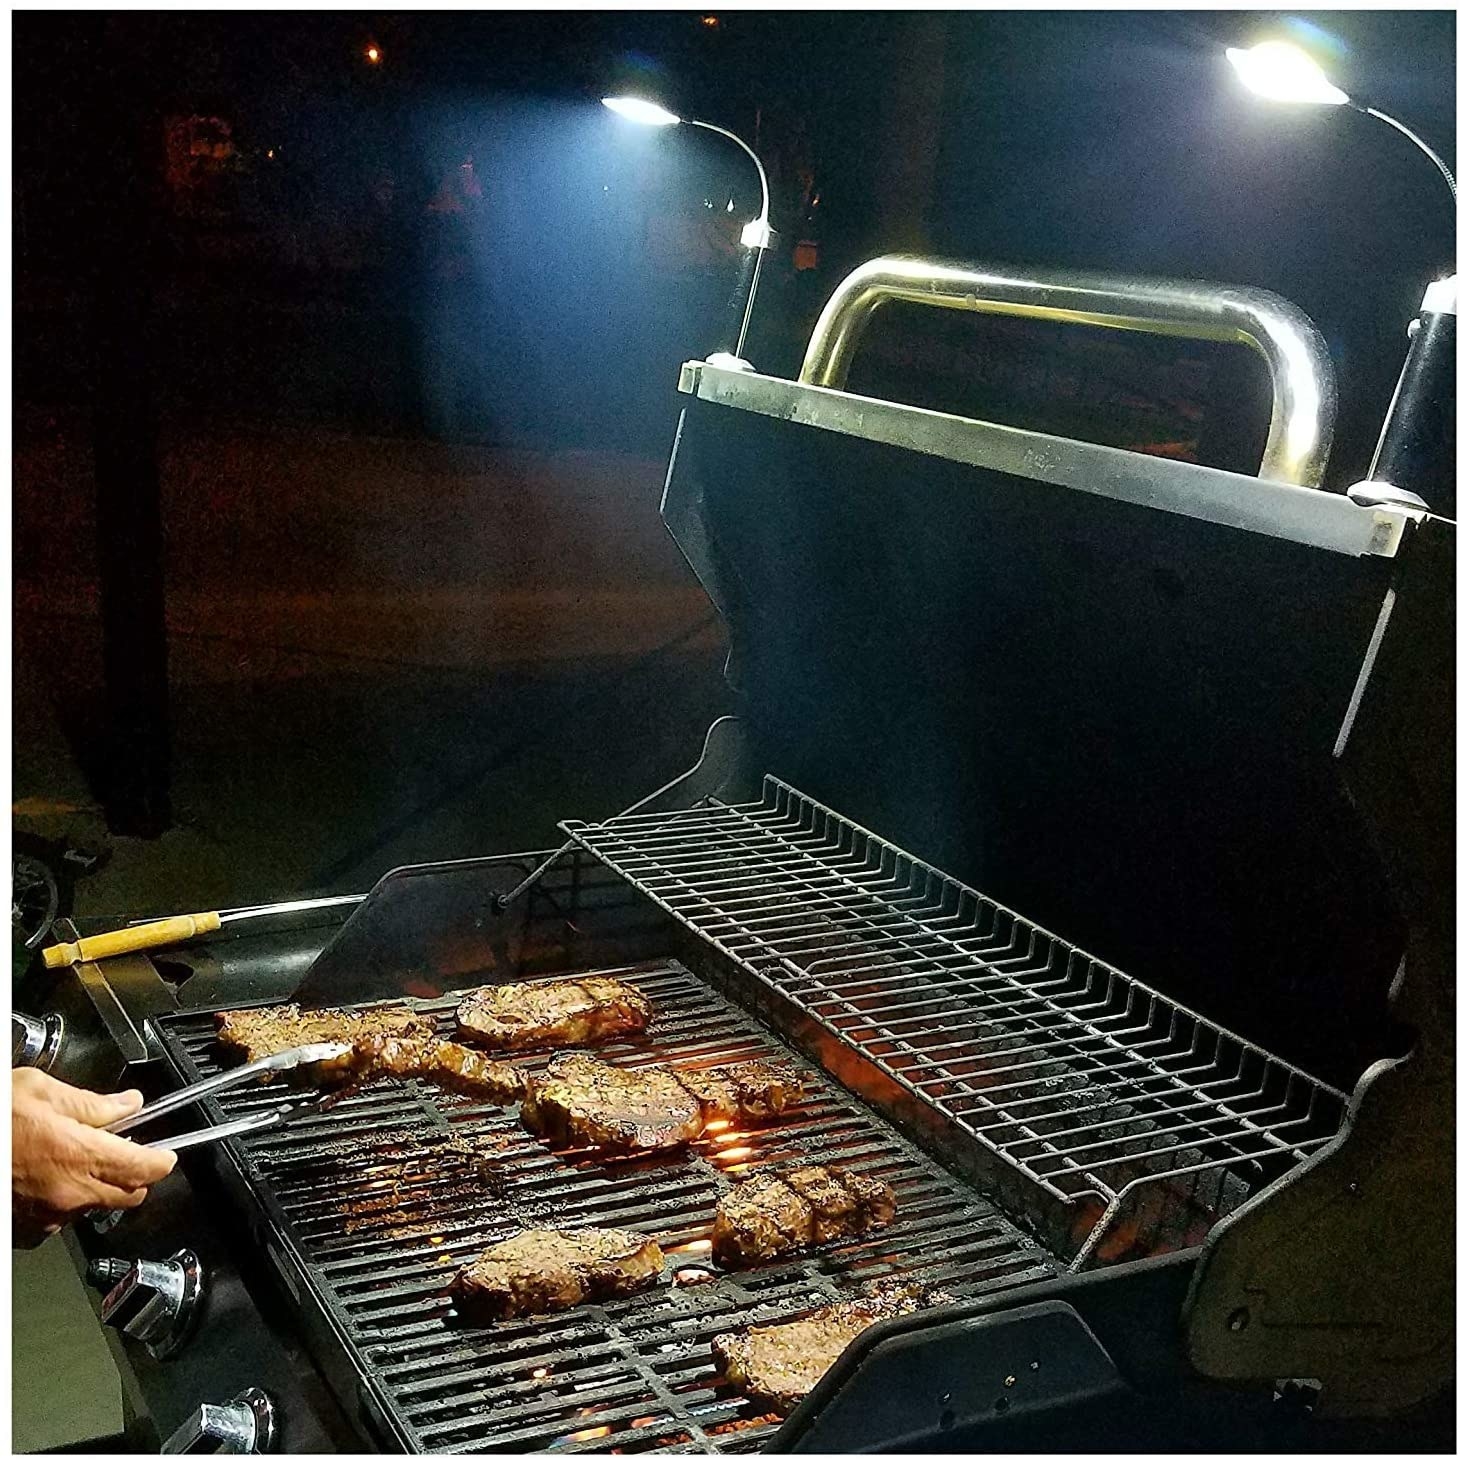 Model grilling meat on a barbecue at night while using the lights, magnetically attached to the grill